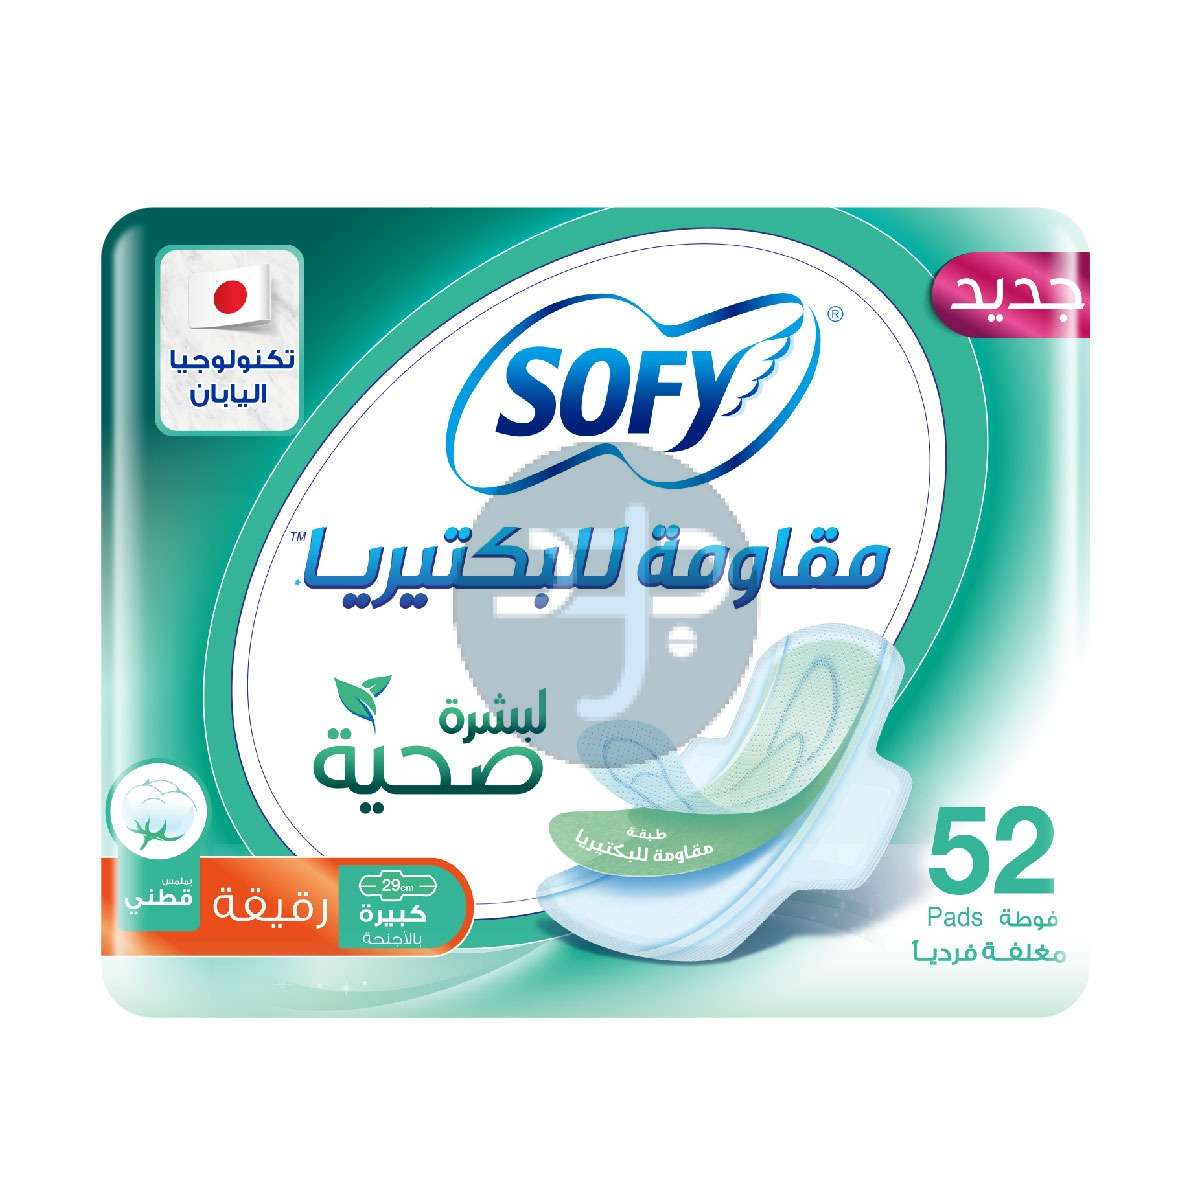 Product-SOFY Anti-Bacterial Sanitary Pads with Wings, Slim, Large 29 cm, Pack of 52 Pads